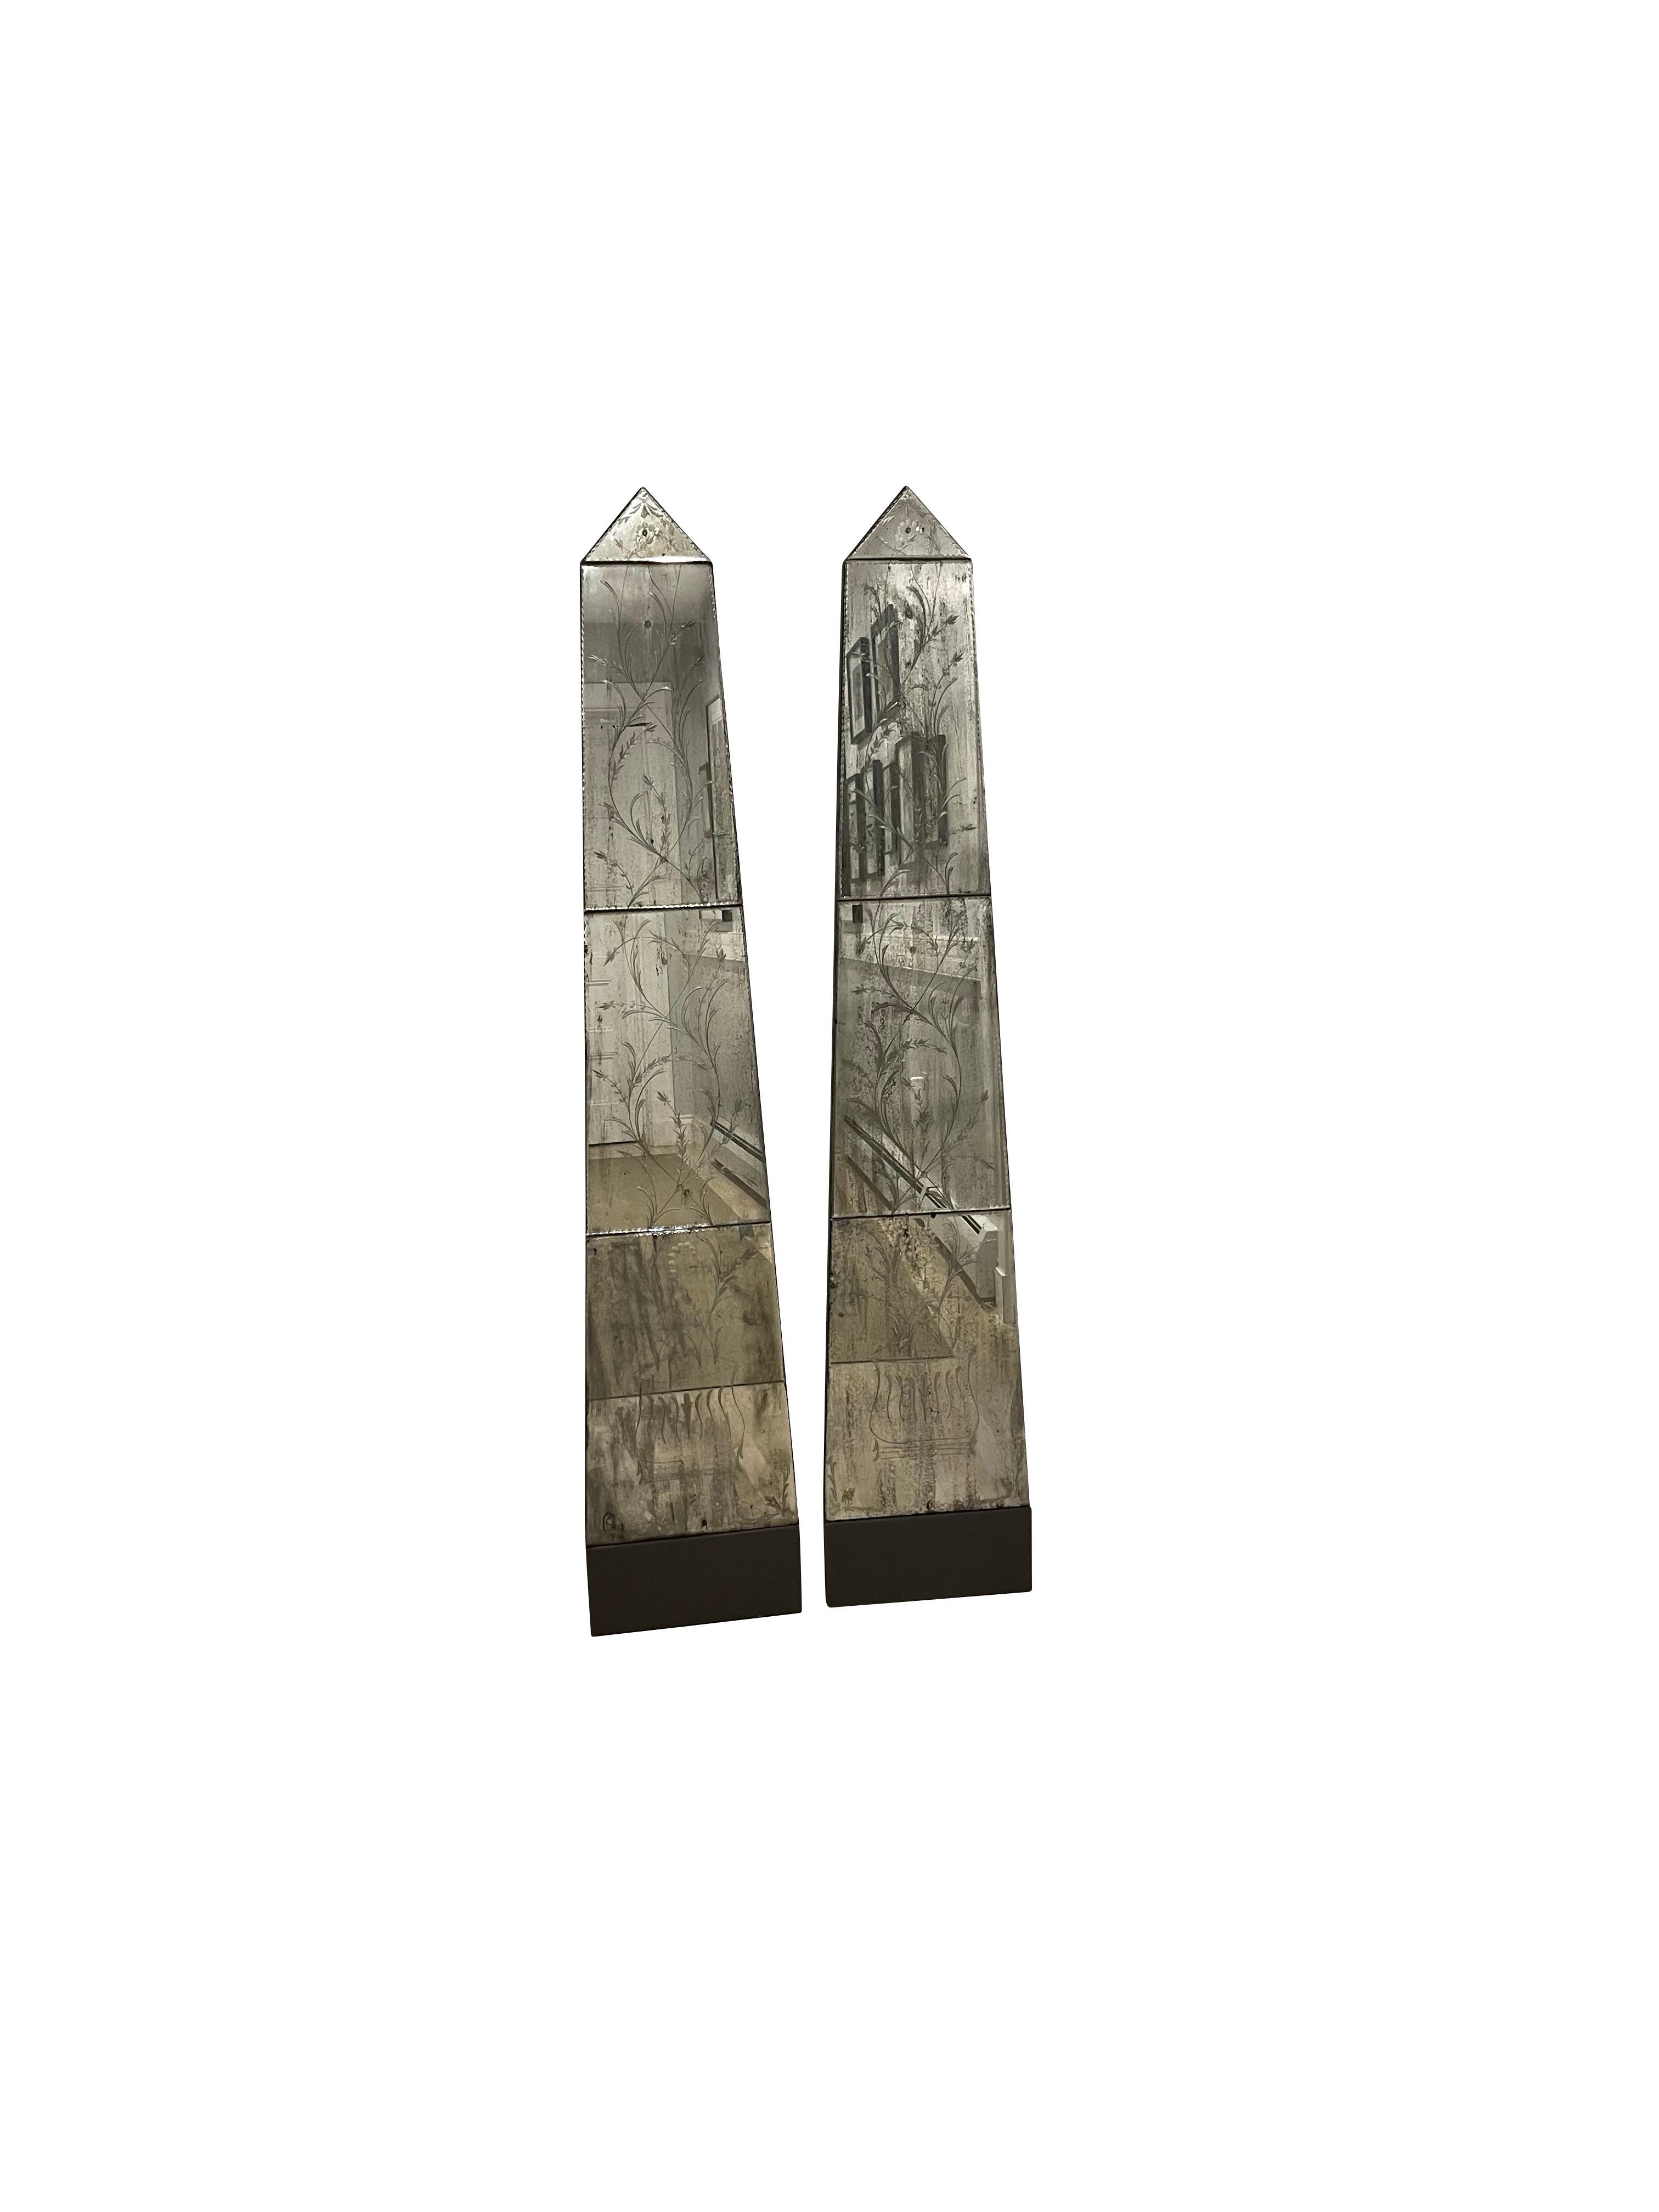 Pair of Obelisk Mirrored Panels with Botanical Etchings 2